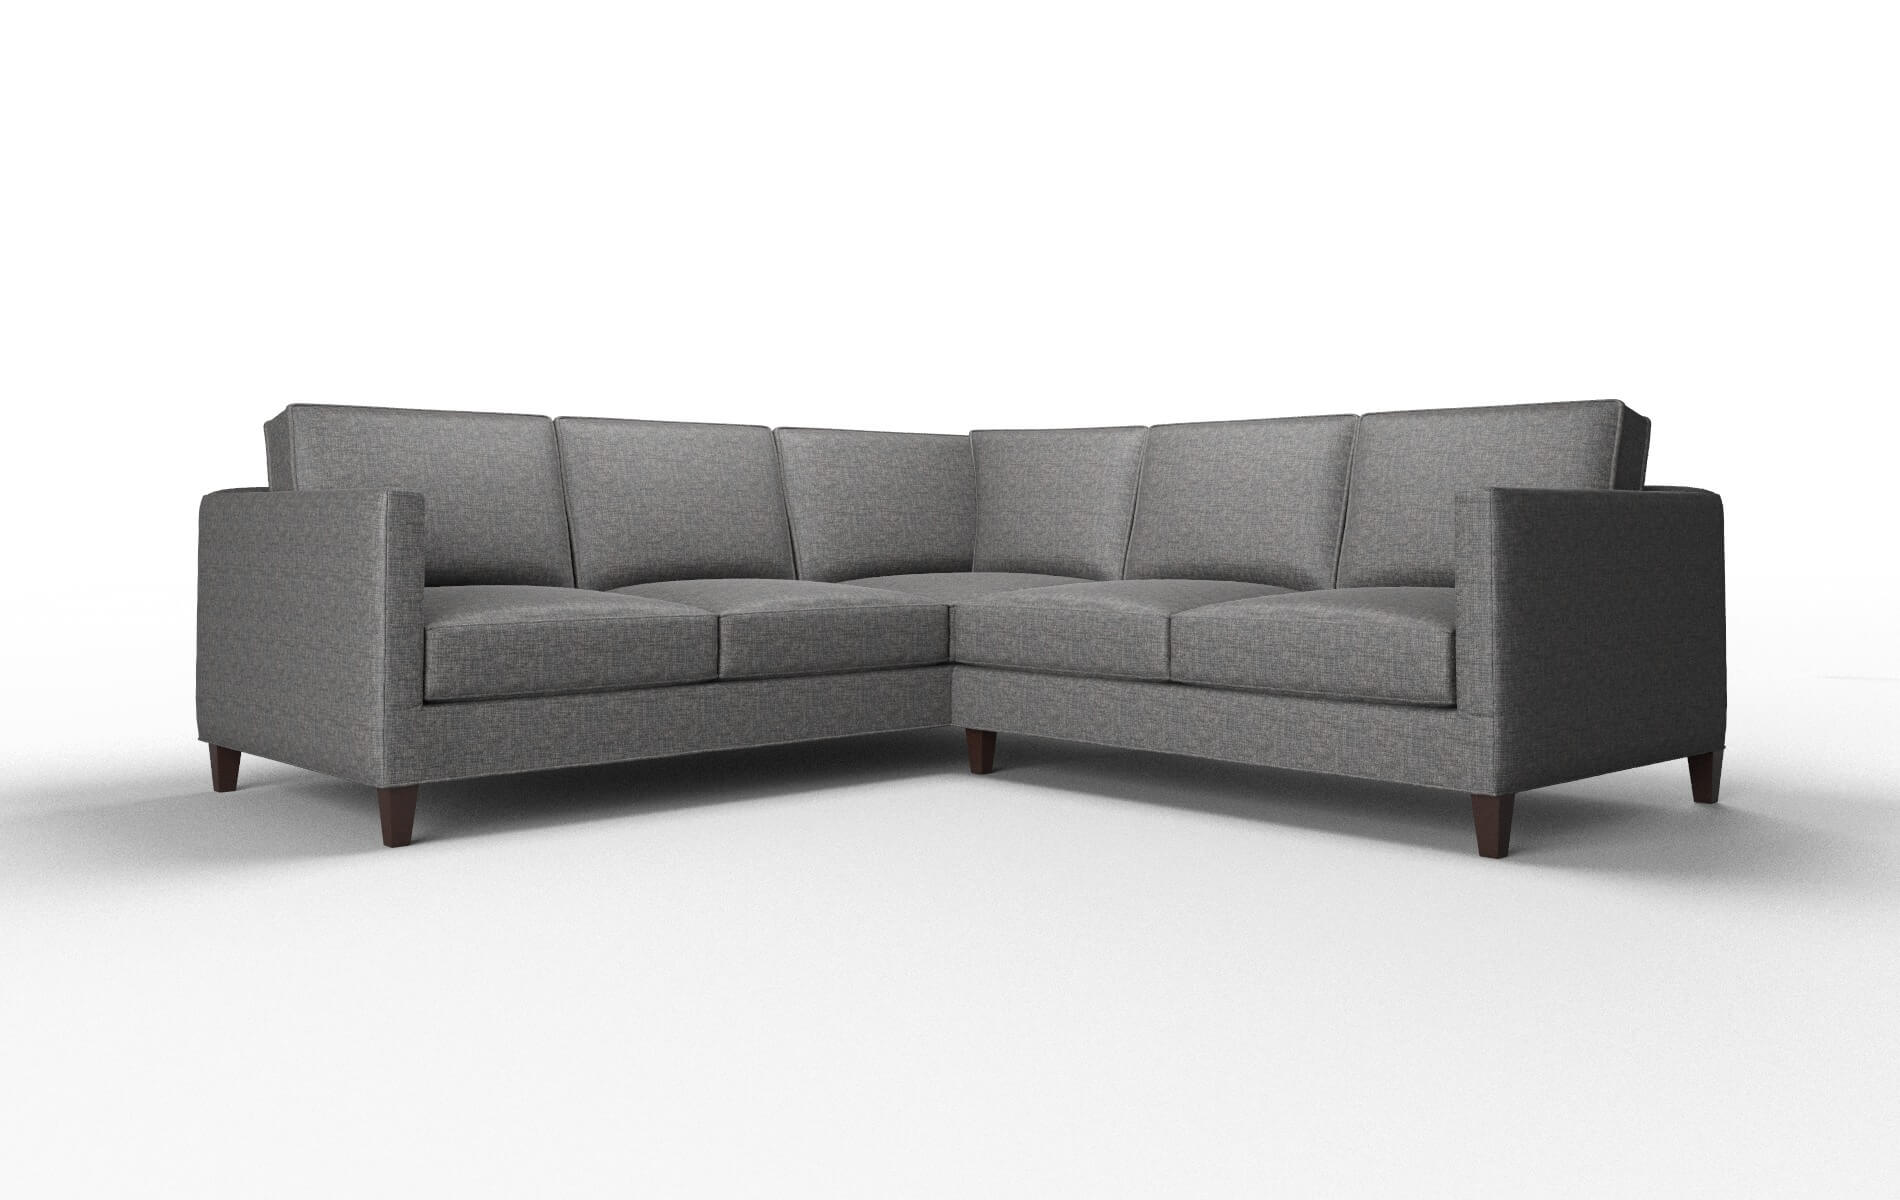 Alps Curious Pacific Sectional espresso legs